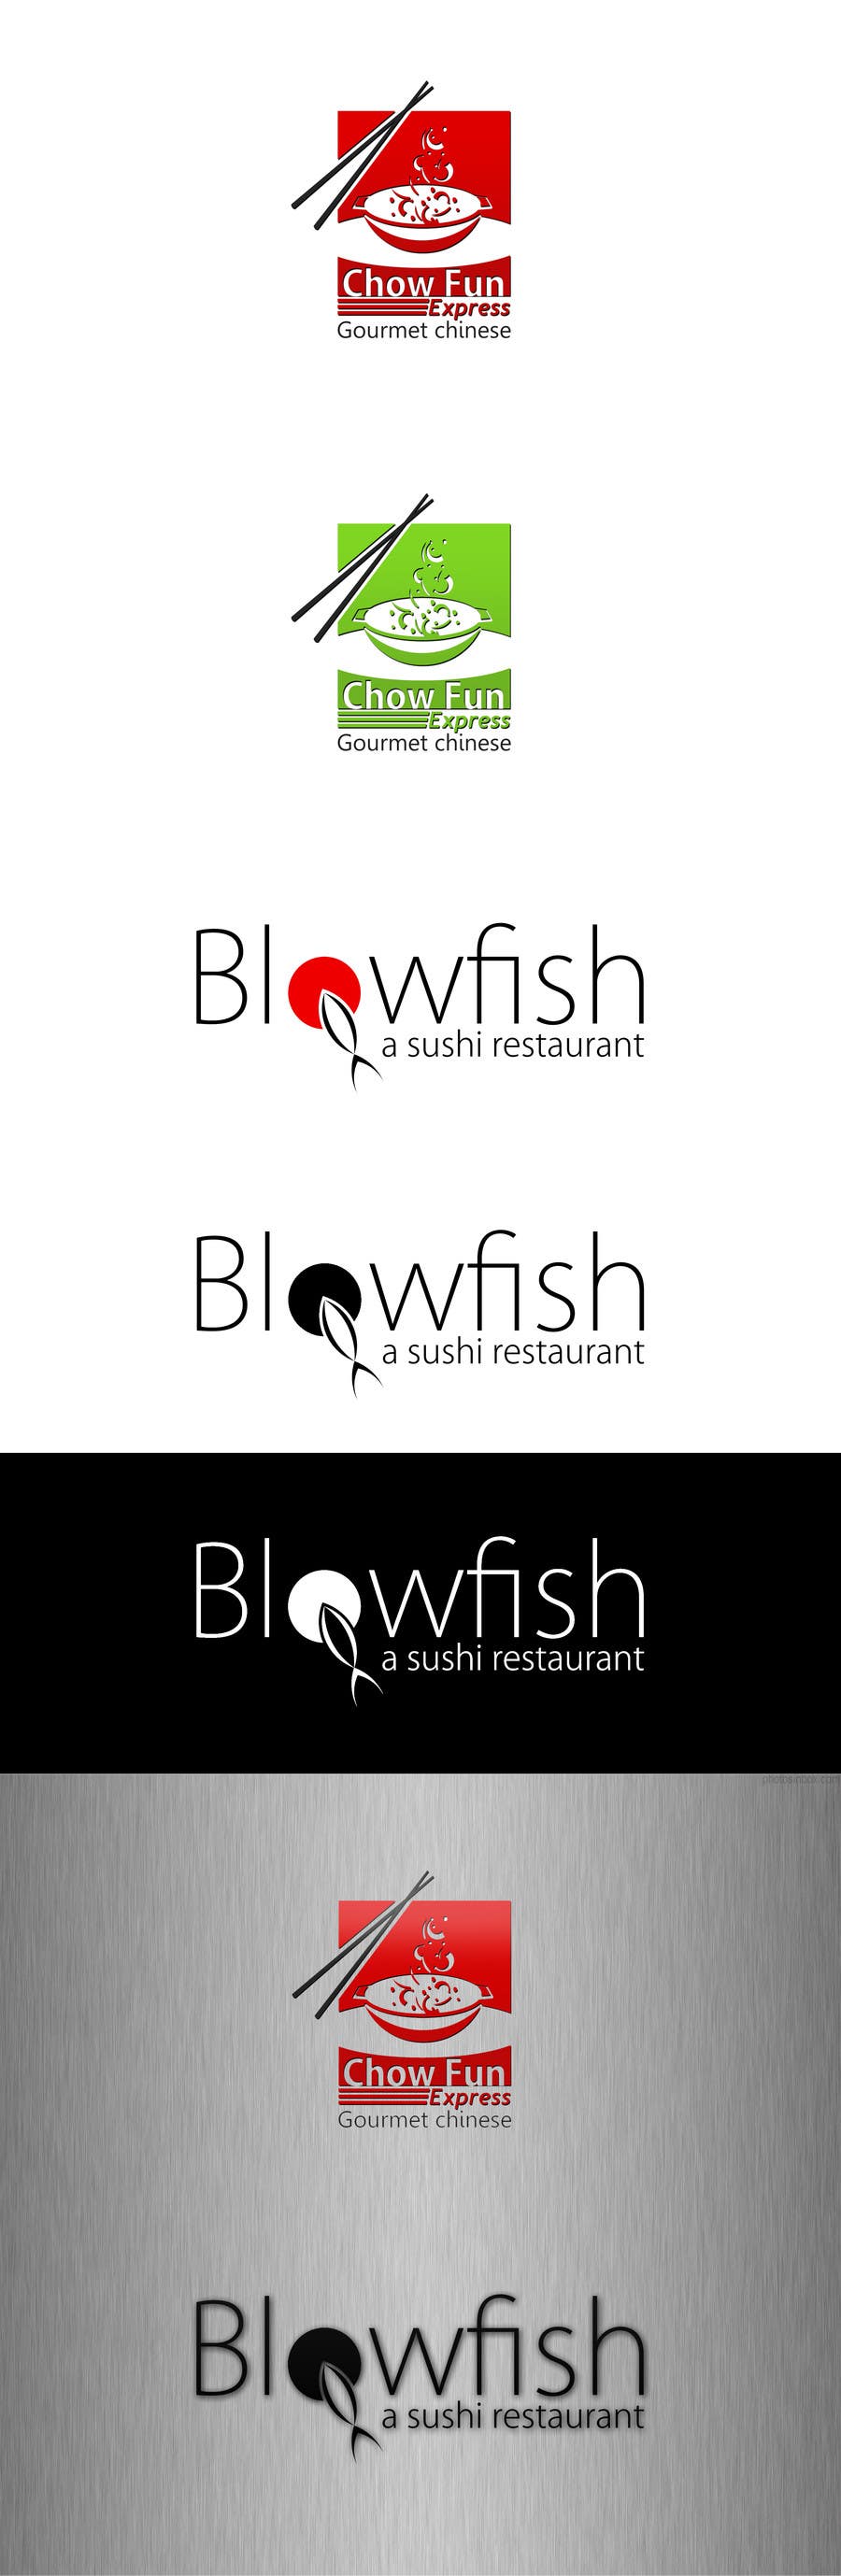 Proposition n°146 du concours                                                 Design two Logos for a Chinese restaurant and a sushi restaurant
                                            